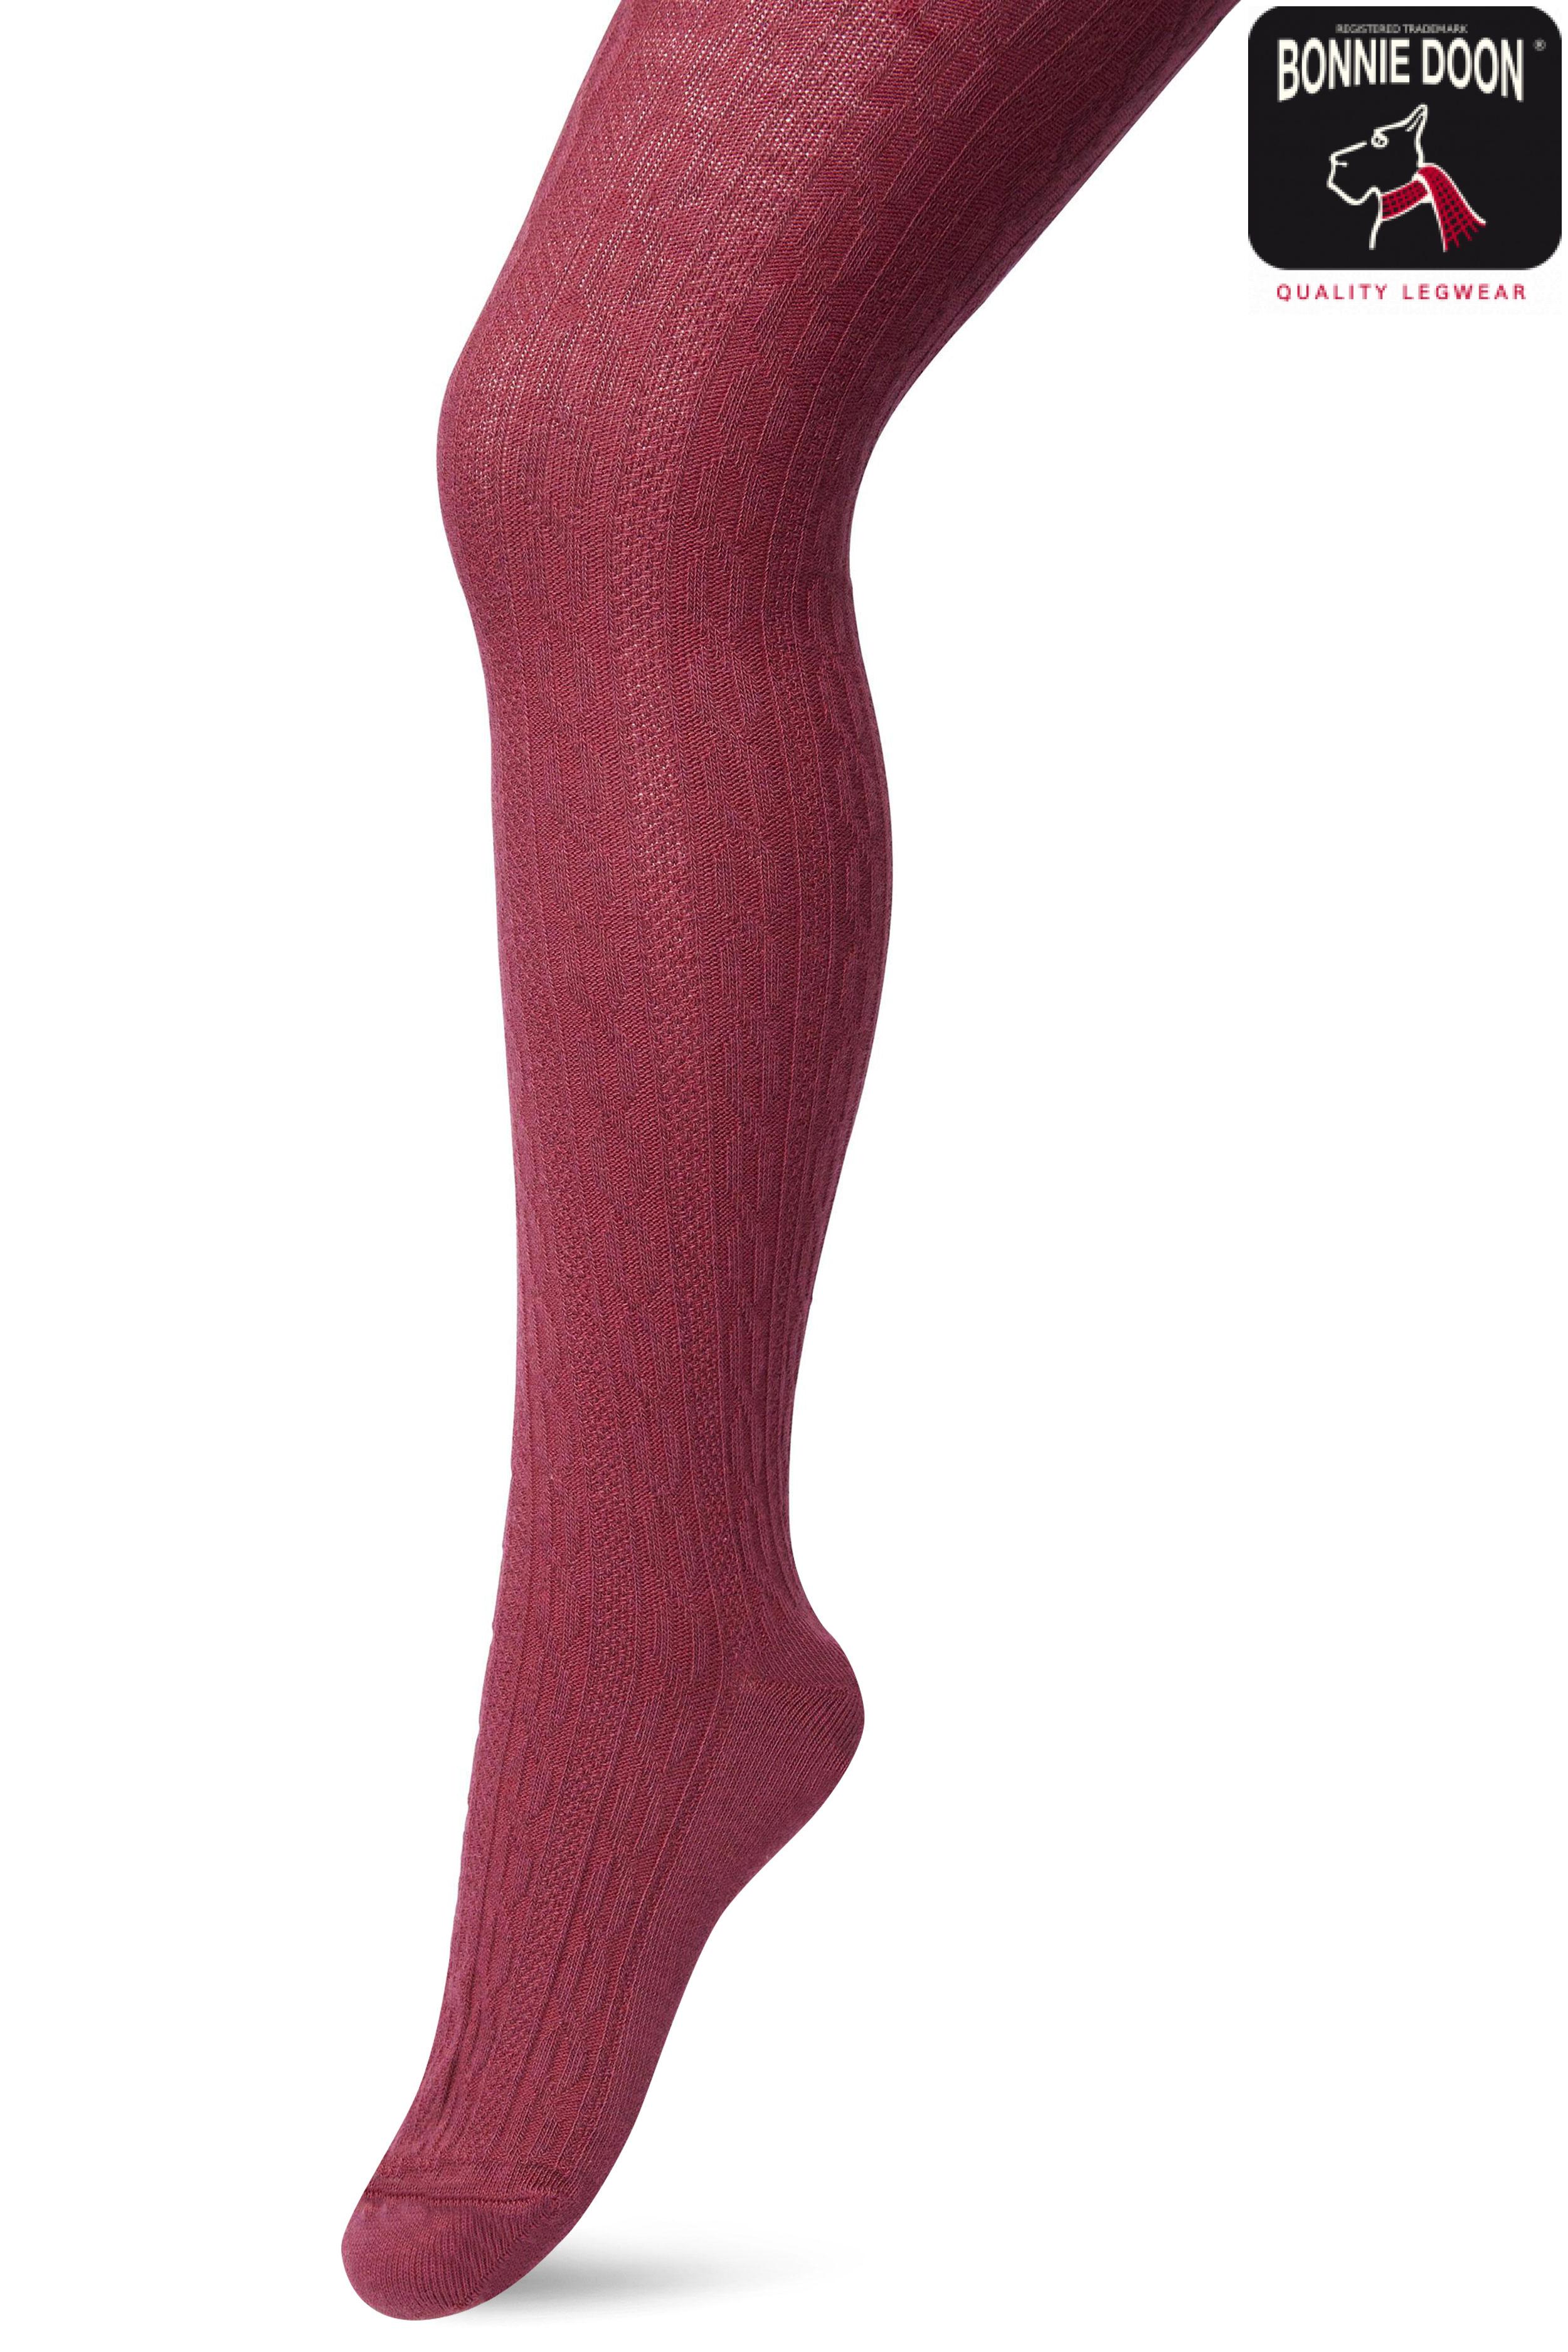 Classic Cable tights Mesa rose